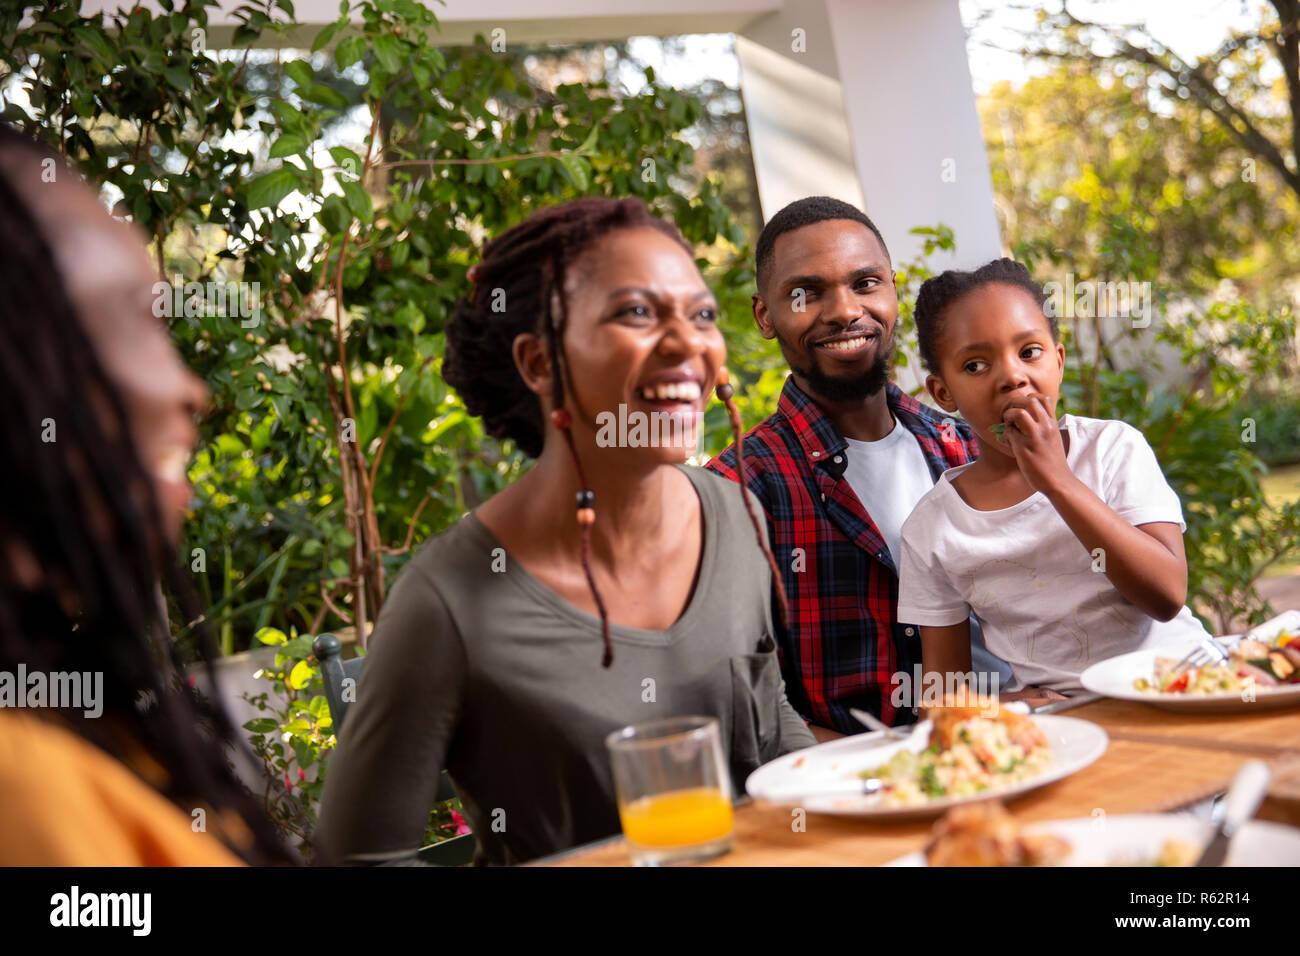 A family eating lunch together on a patio Stock Photo